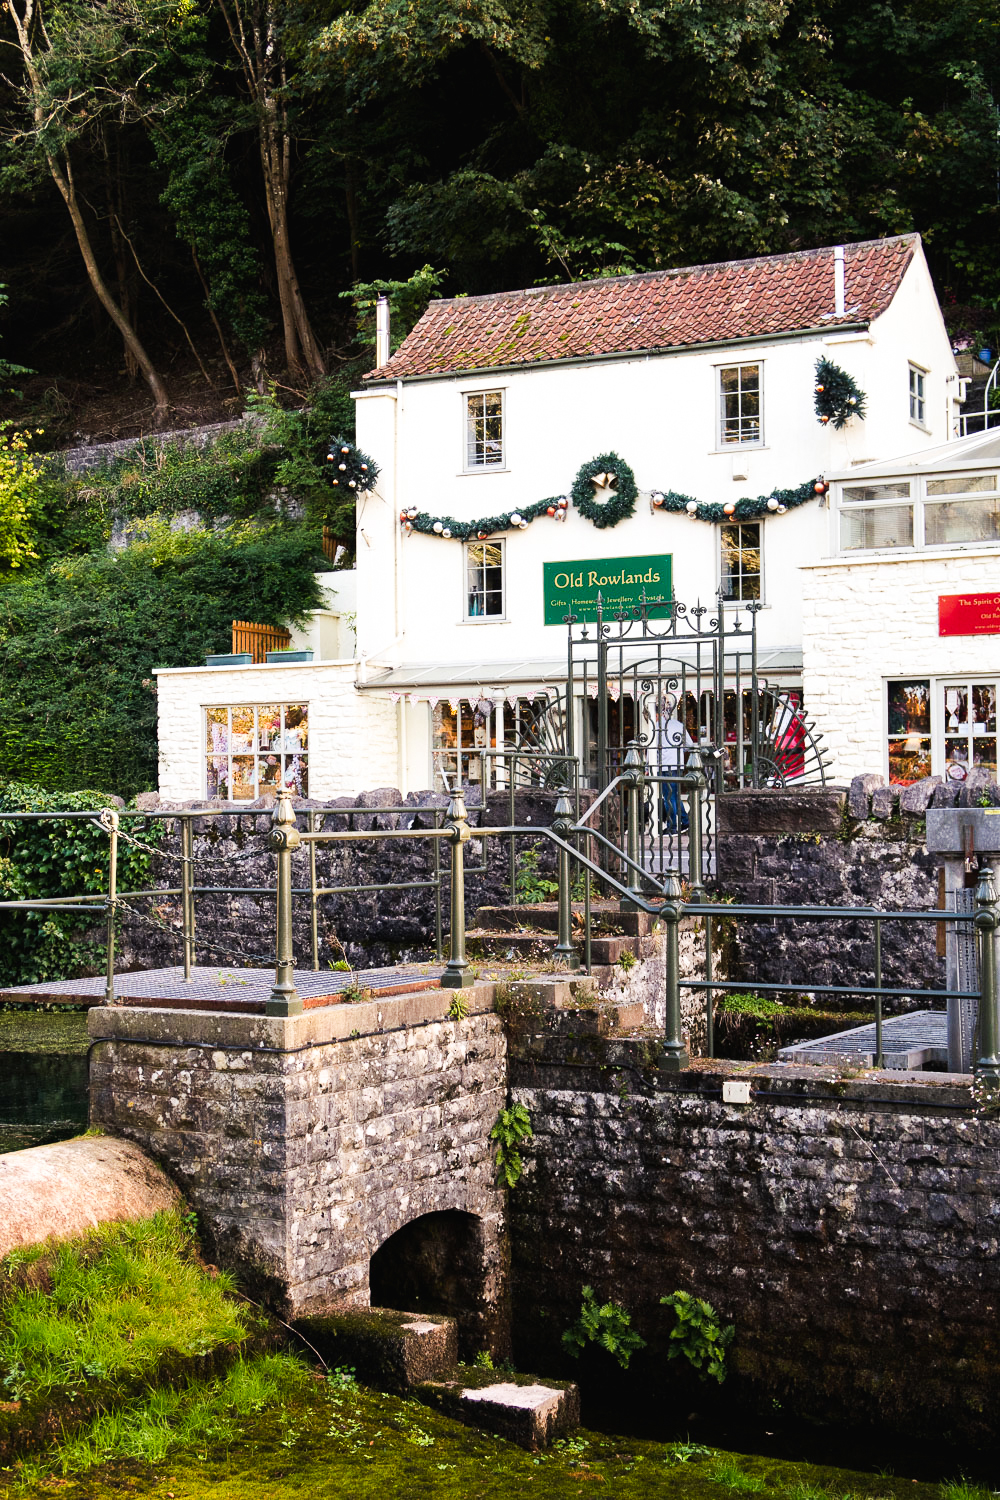 The village of Cheddar Gorge in Somerset, England is where the famous cheese comes from | A Day in Cheddar with The Cheddar Gorge Cheese Company | Mondomulia